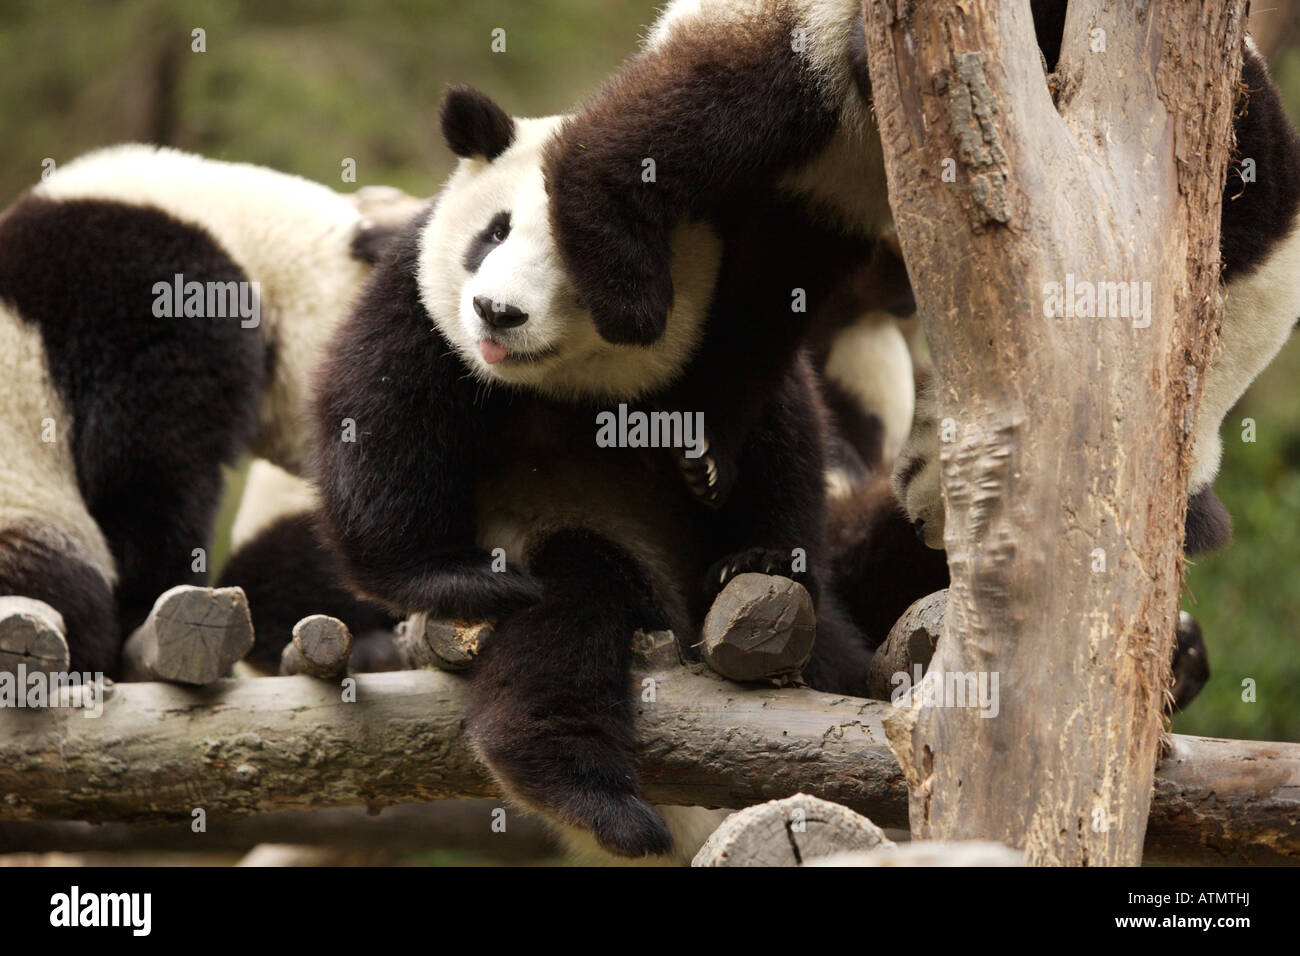 A group of young Giant Pandas in the Wolong Panda Reserve Stock Photo